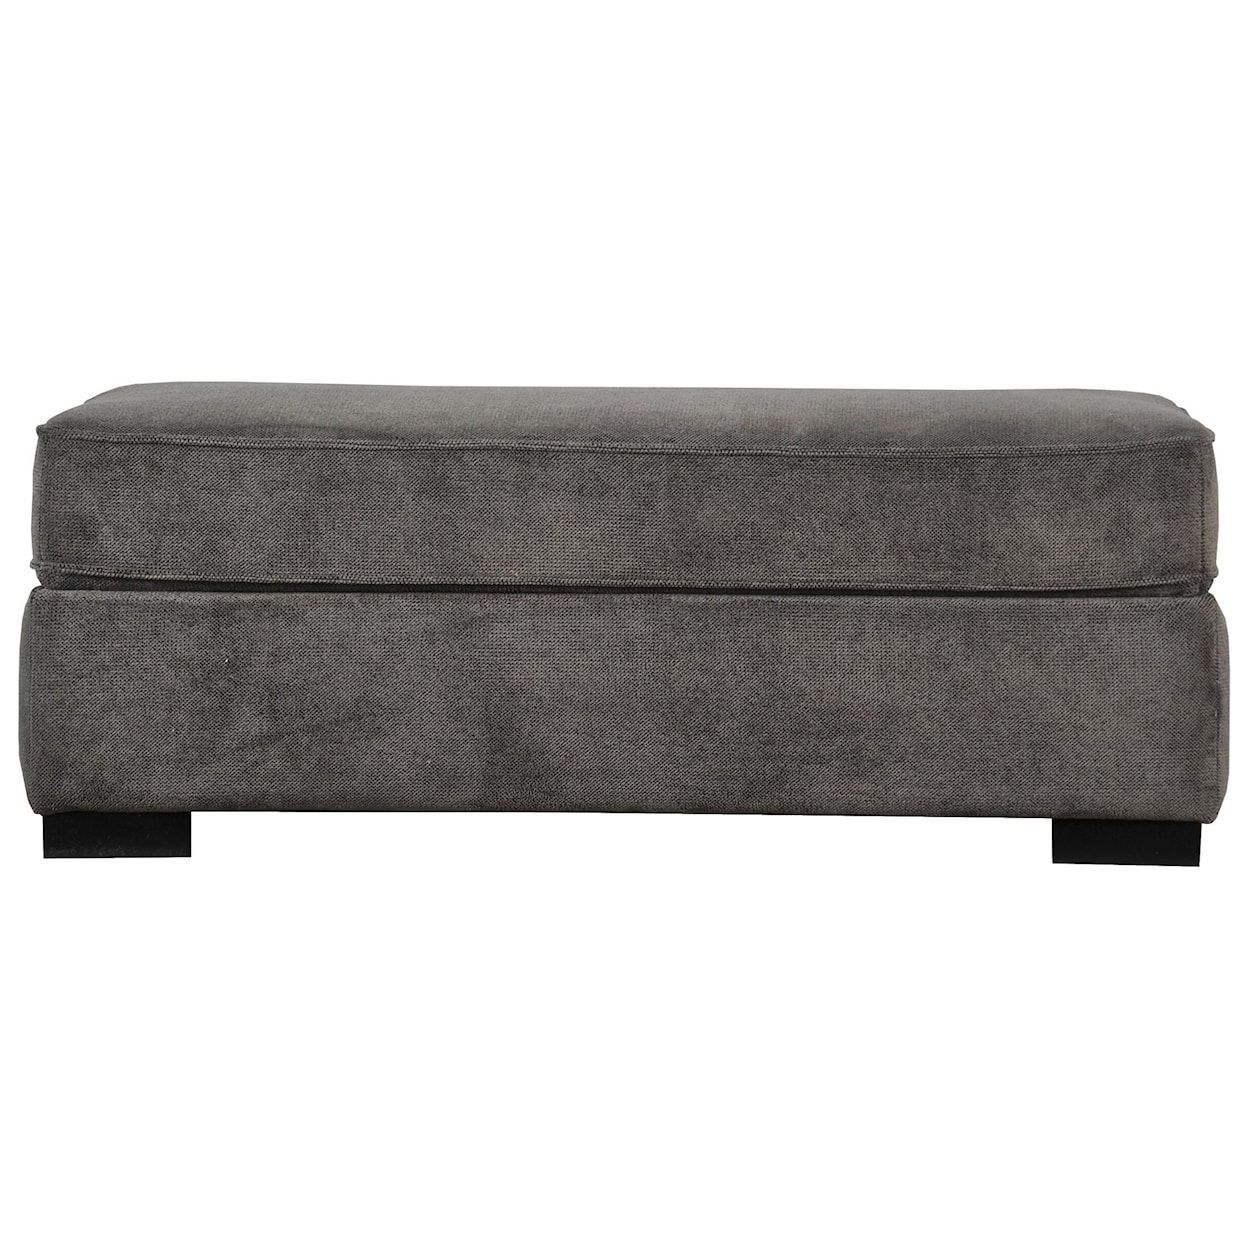 Sunset Home 29658 Rect. Cocktail Ottoman